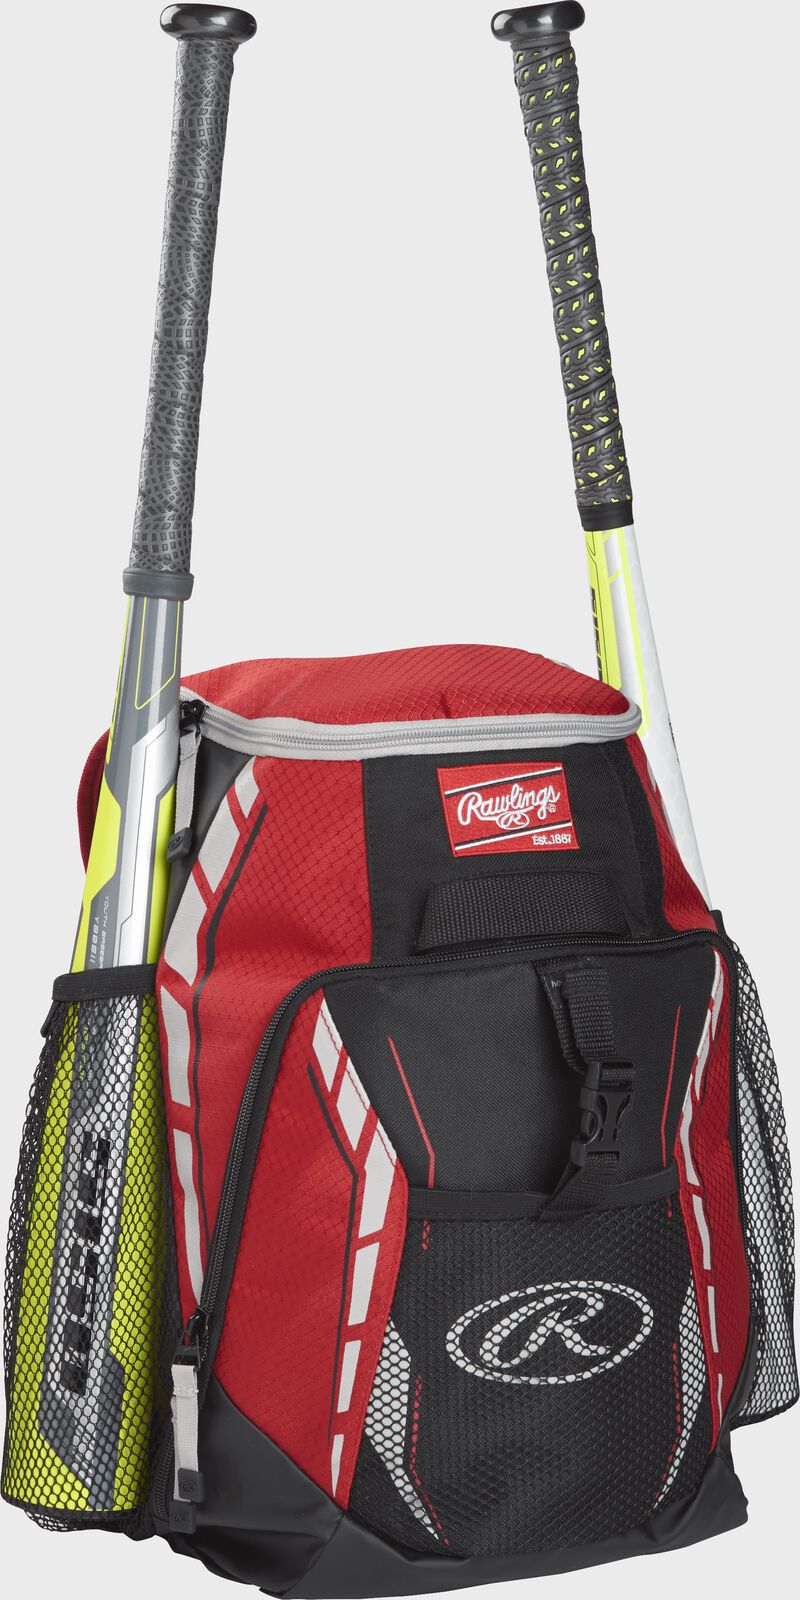 Front left view of a Scarlet Rawlings Youth Players Team Backpack with two bats | SKU:R400-S loading=